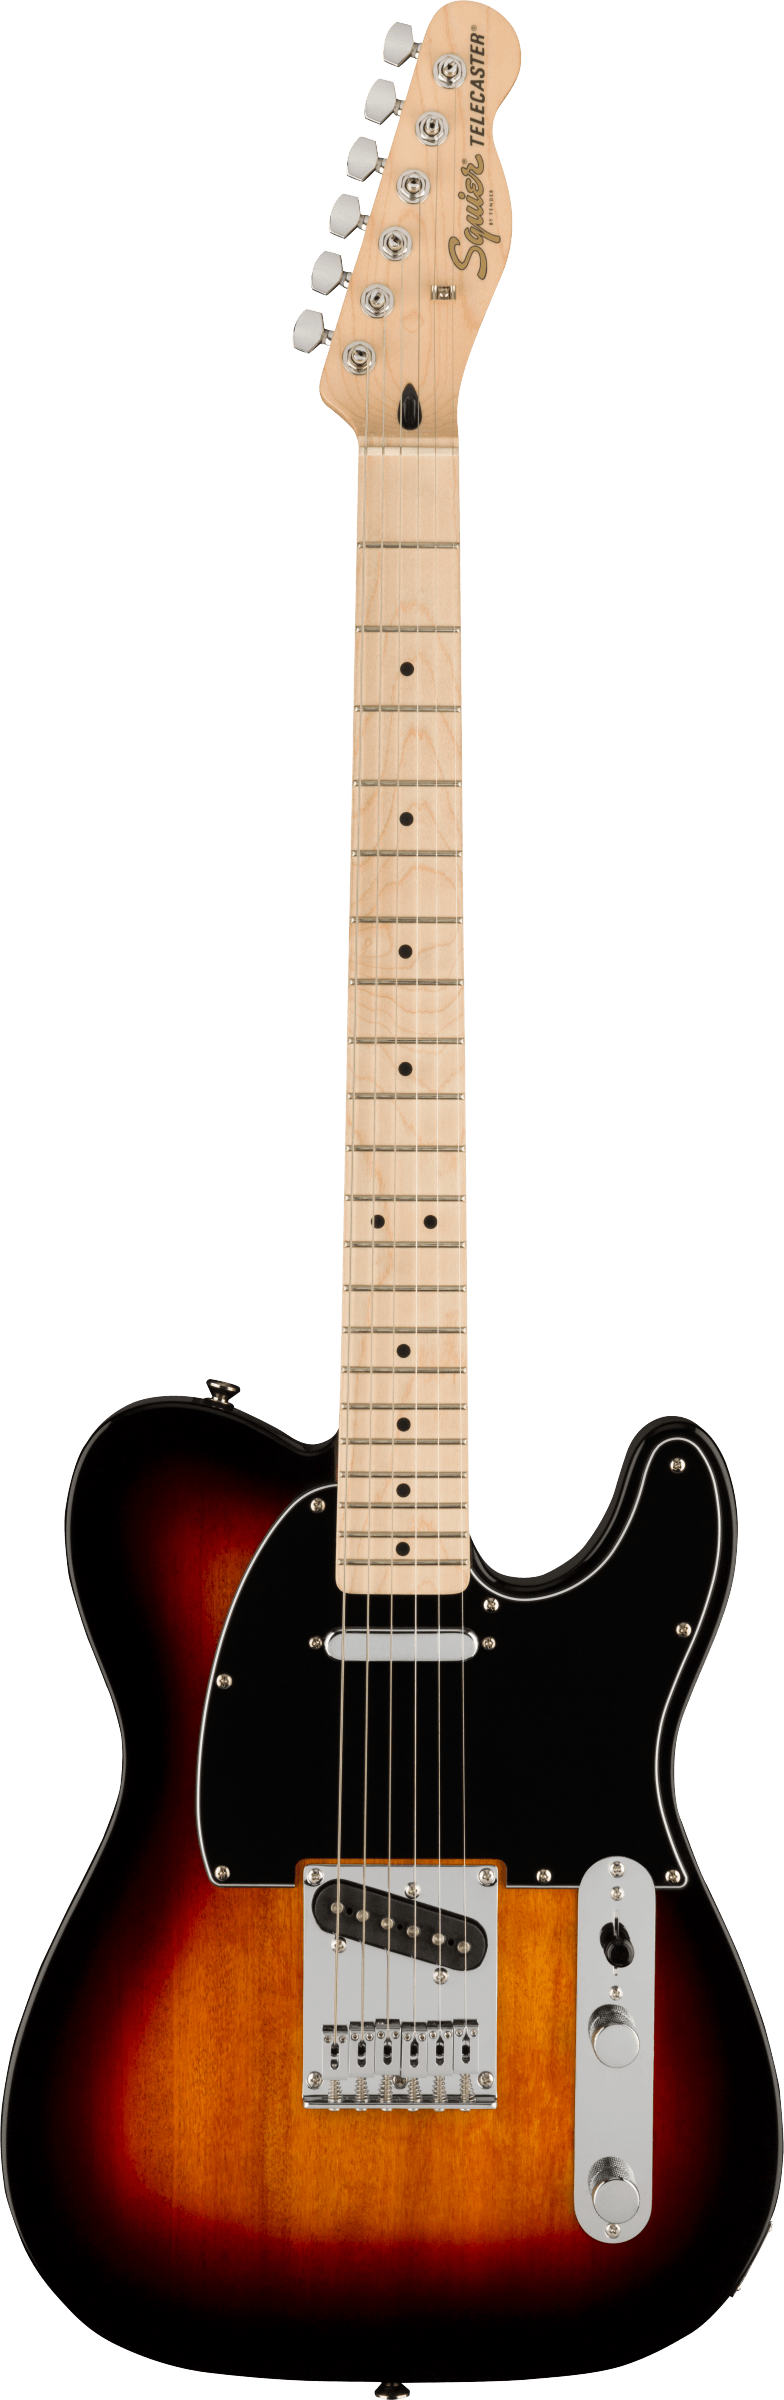 Squier Affinity telecaster with Maple Board in three-tone Sunburst